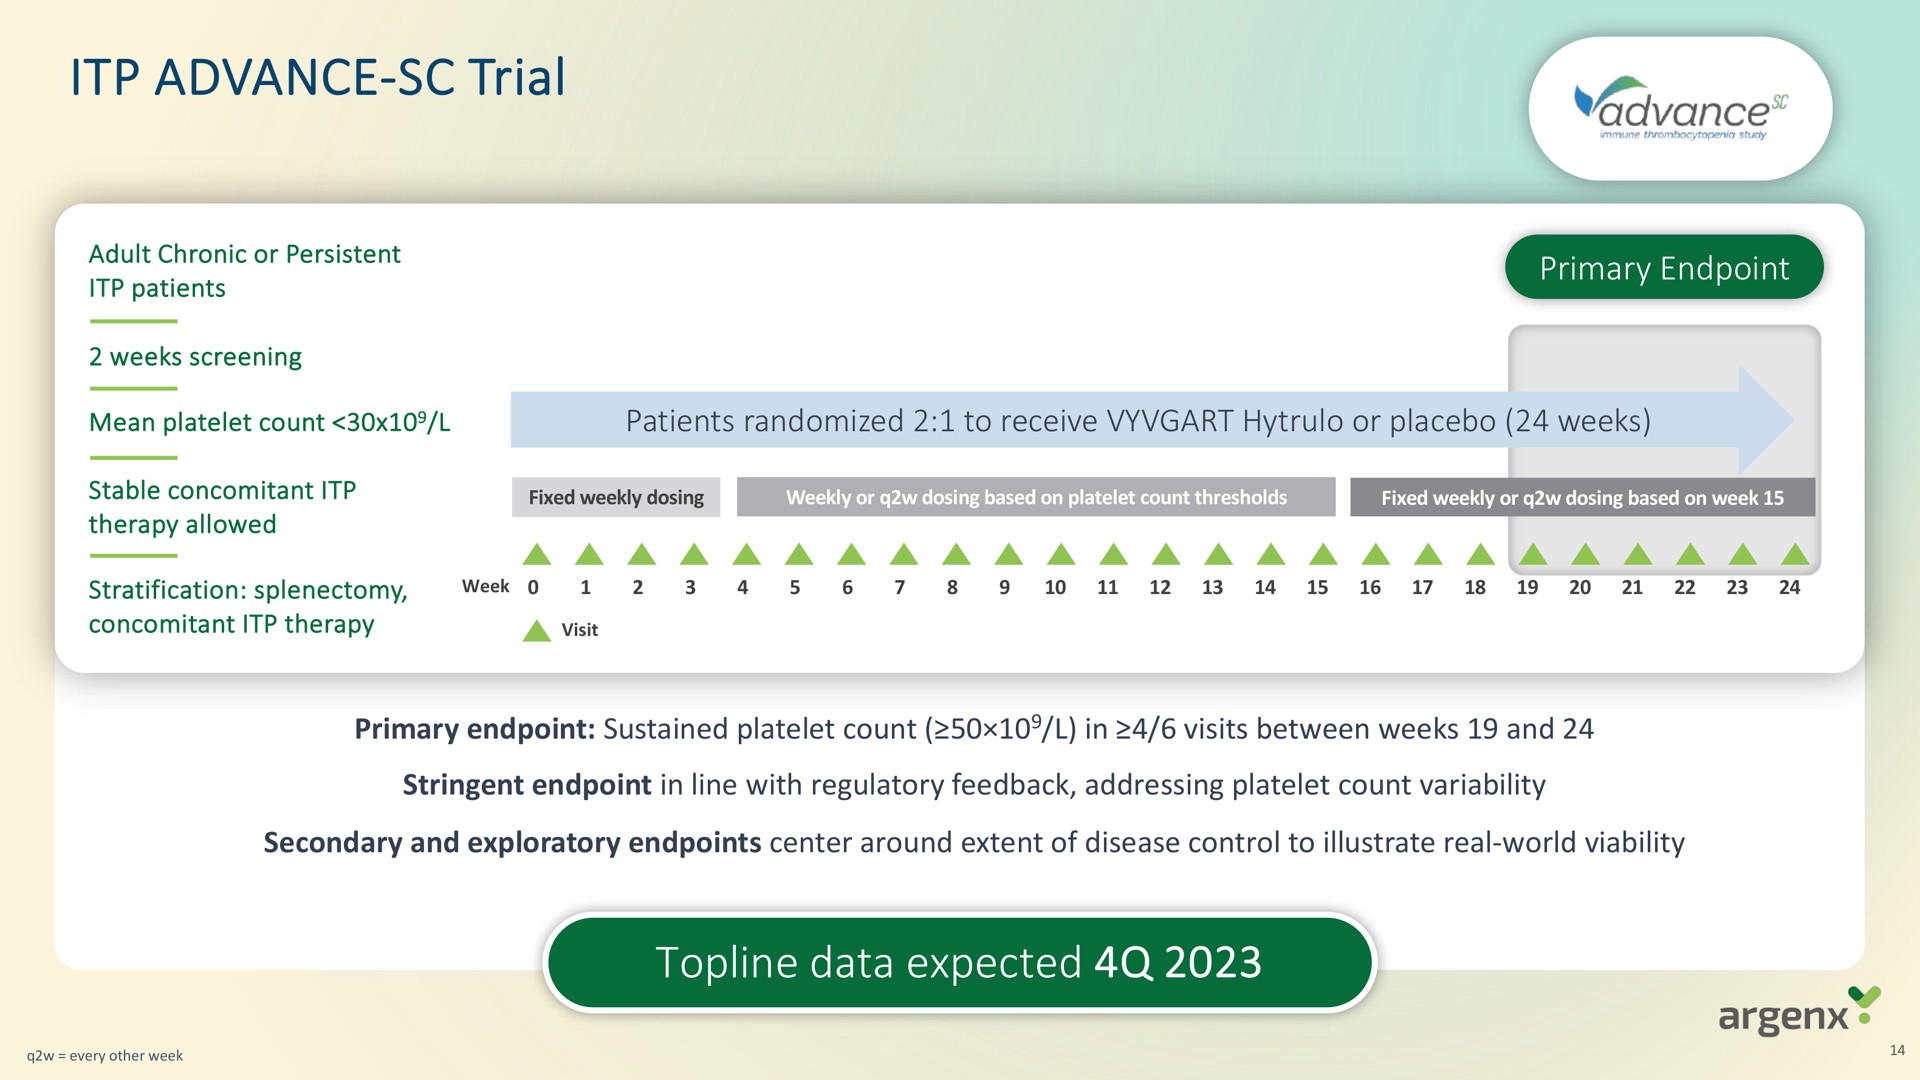 advance trial topline data expected | argenx SE